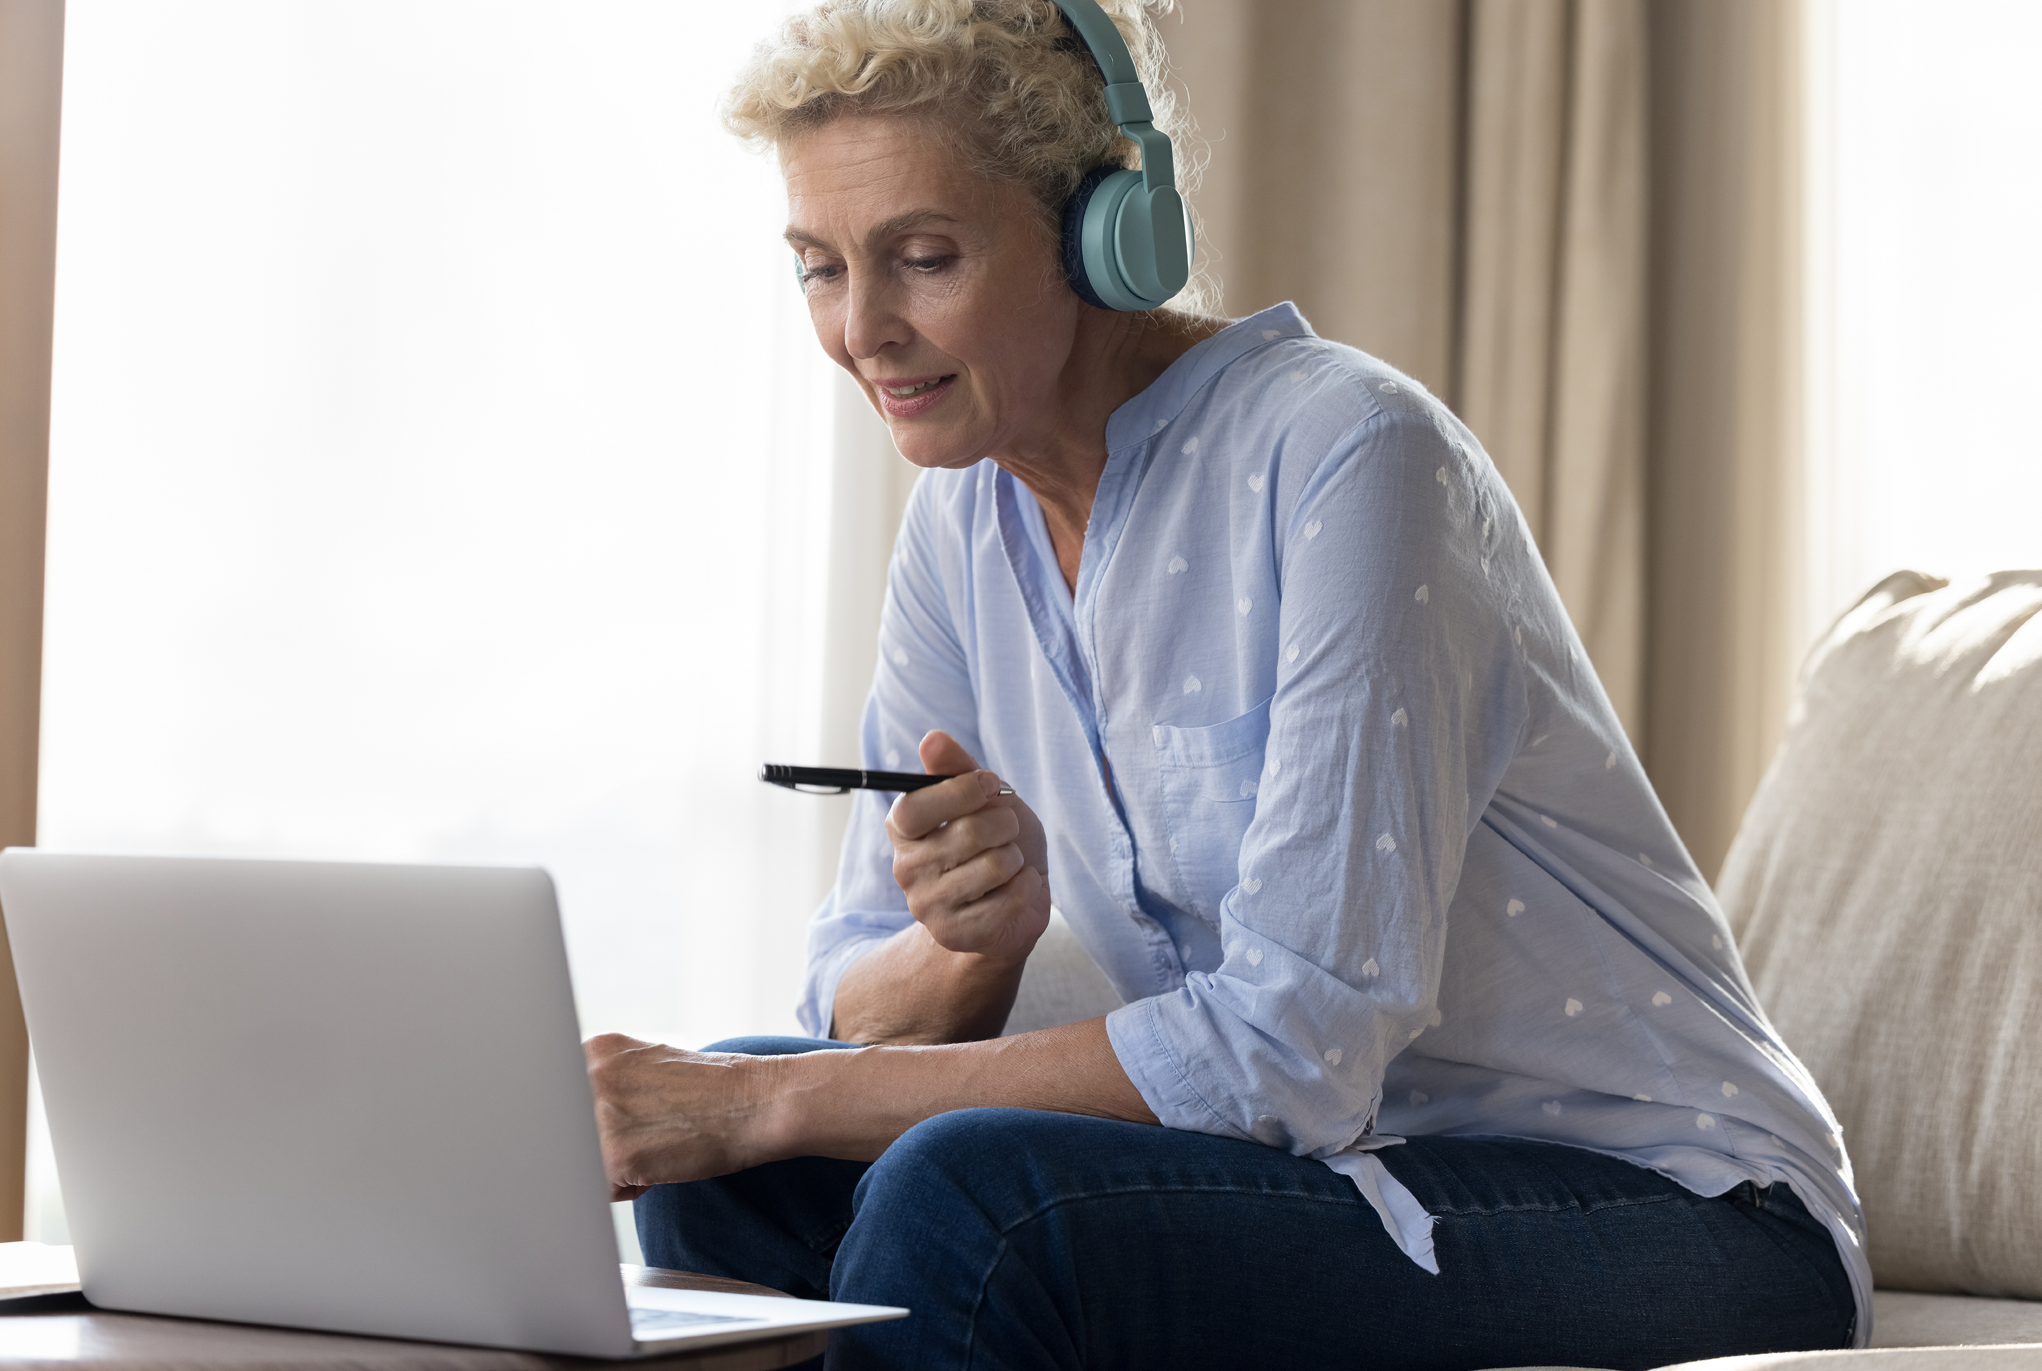 Woman sitting on a couch wearing headphones while using her laptop